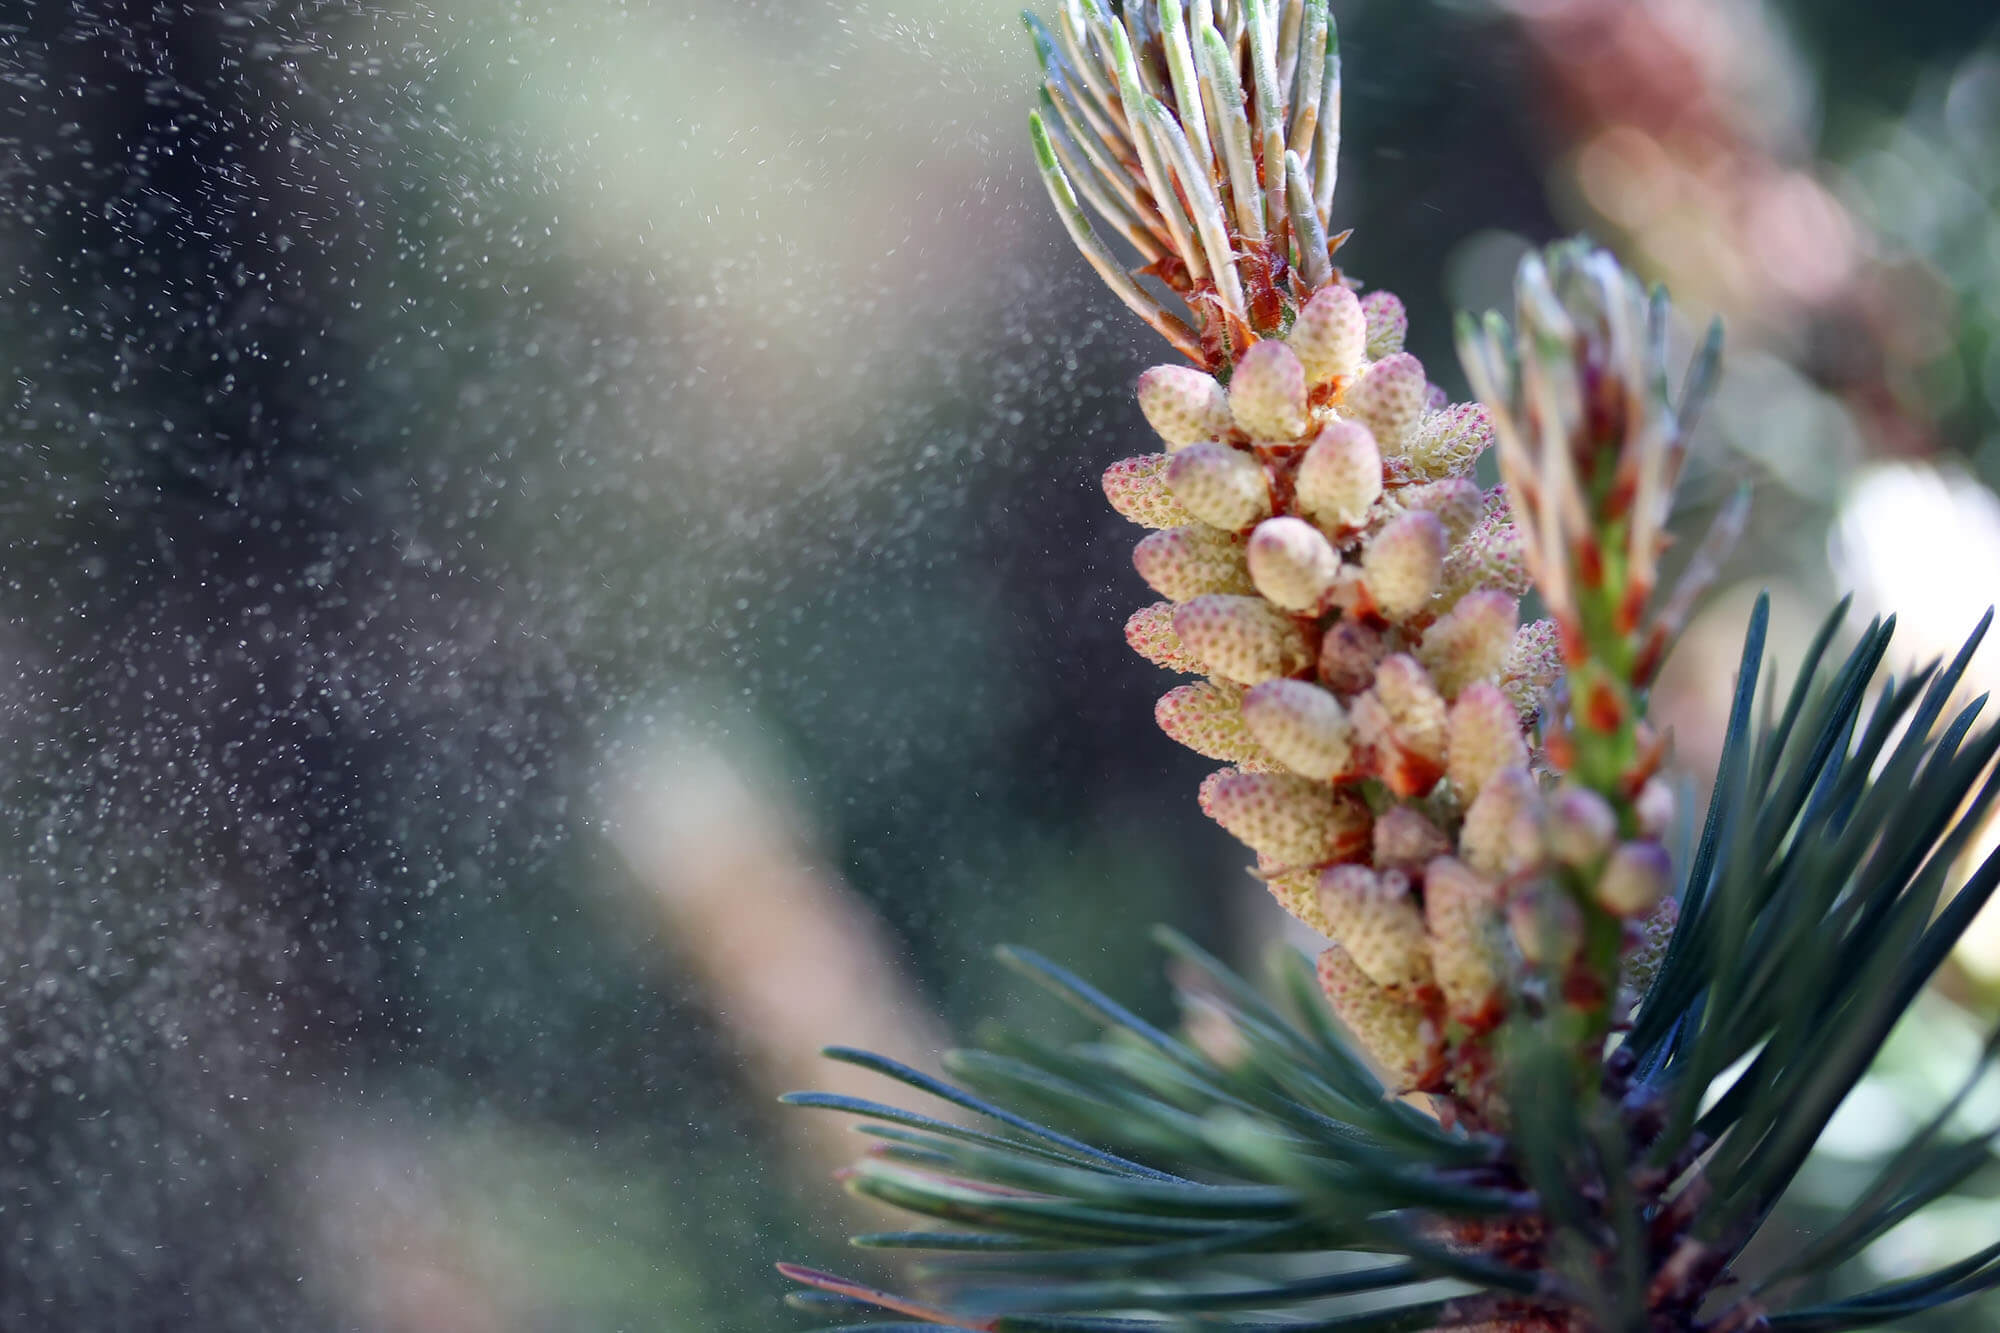 How Will Pine Pollen Benefit You?